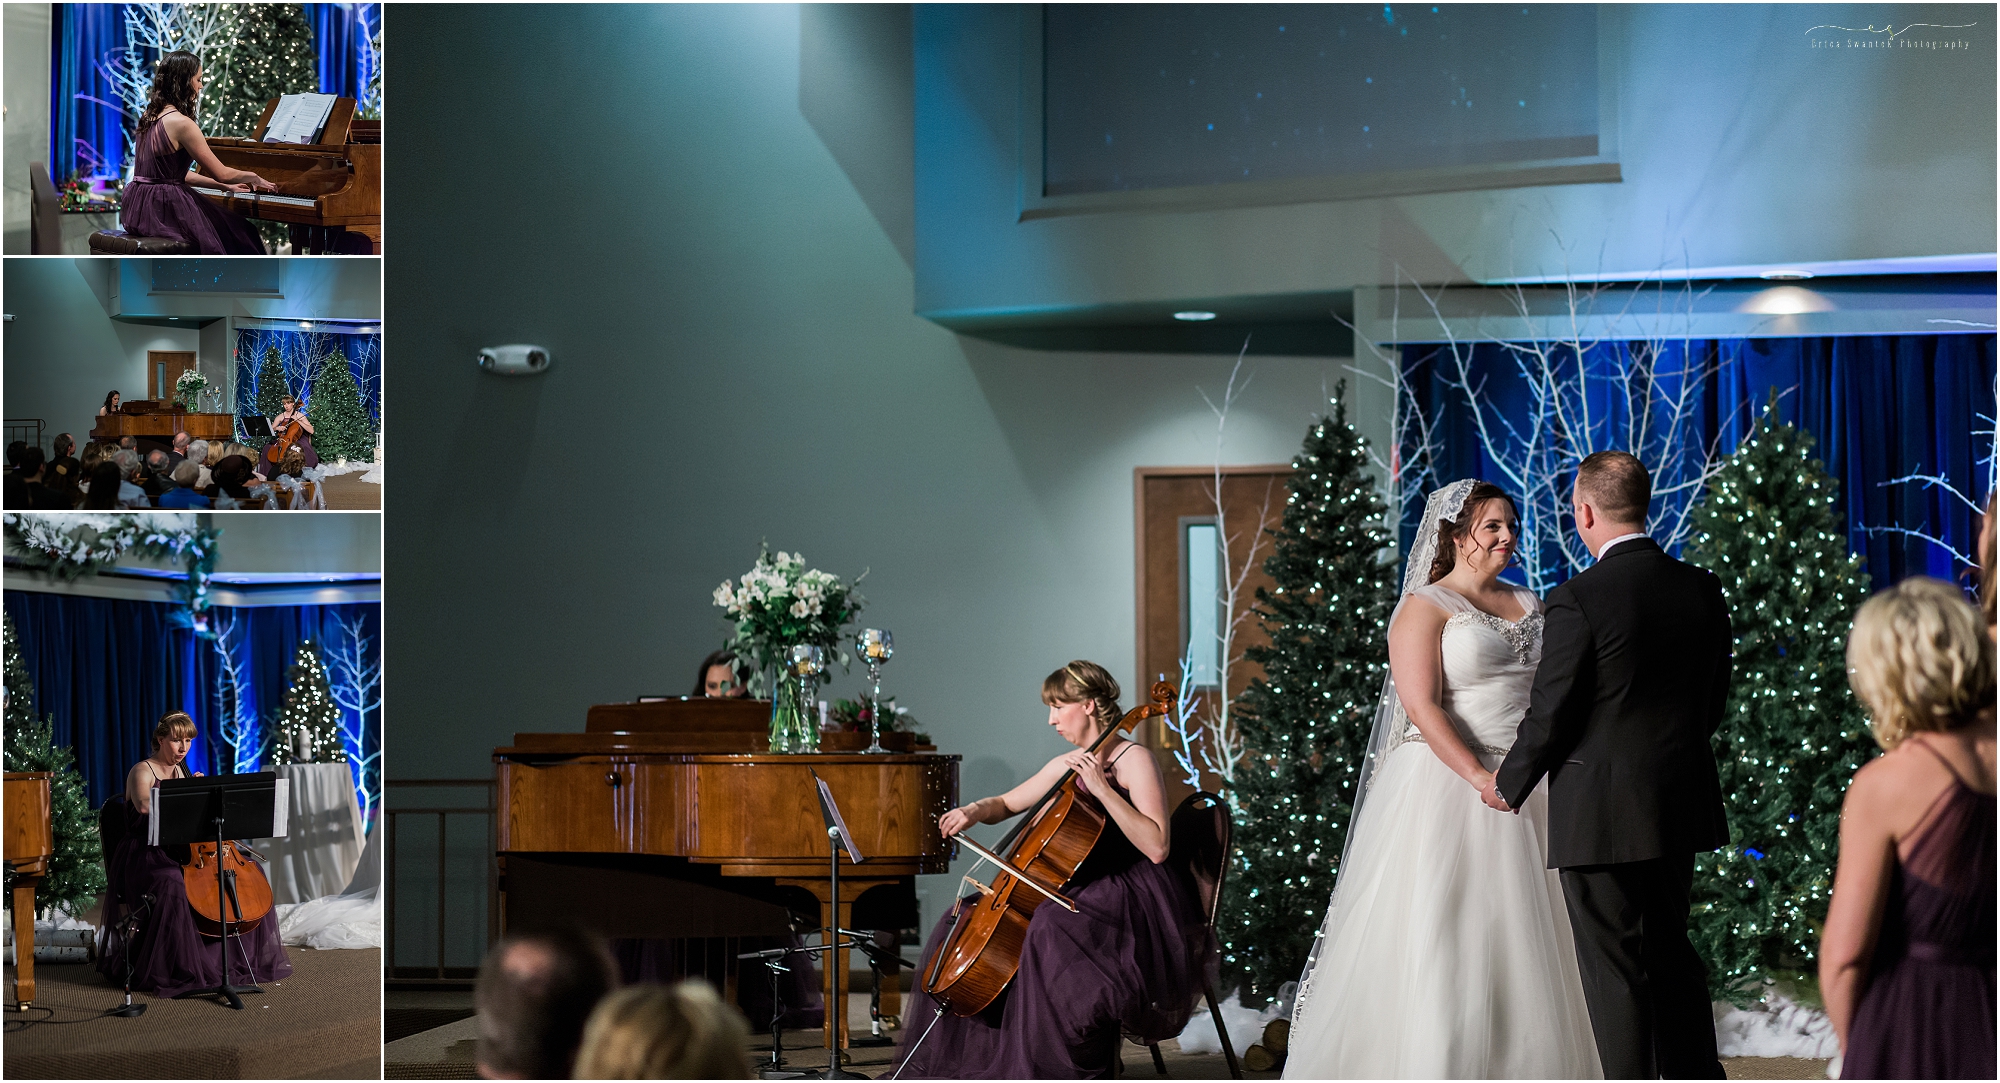 A beautiful musical performance at this Bend, Oregon church wedding. 